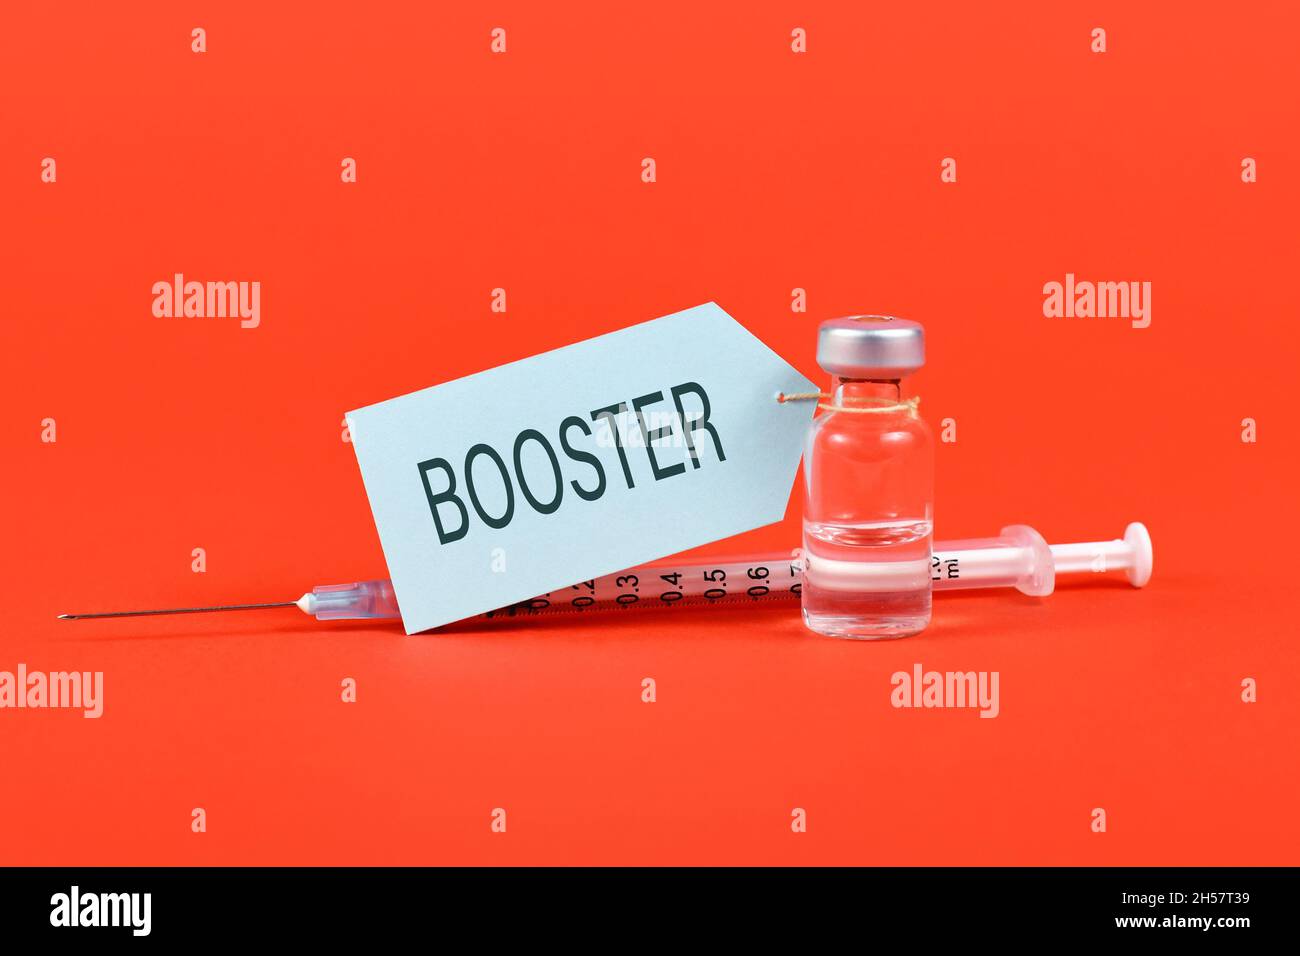 Concept for Corina virus booster vaccination with vial and syringe on red background Stock Photo